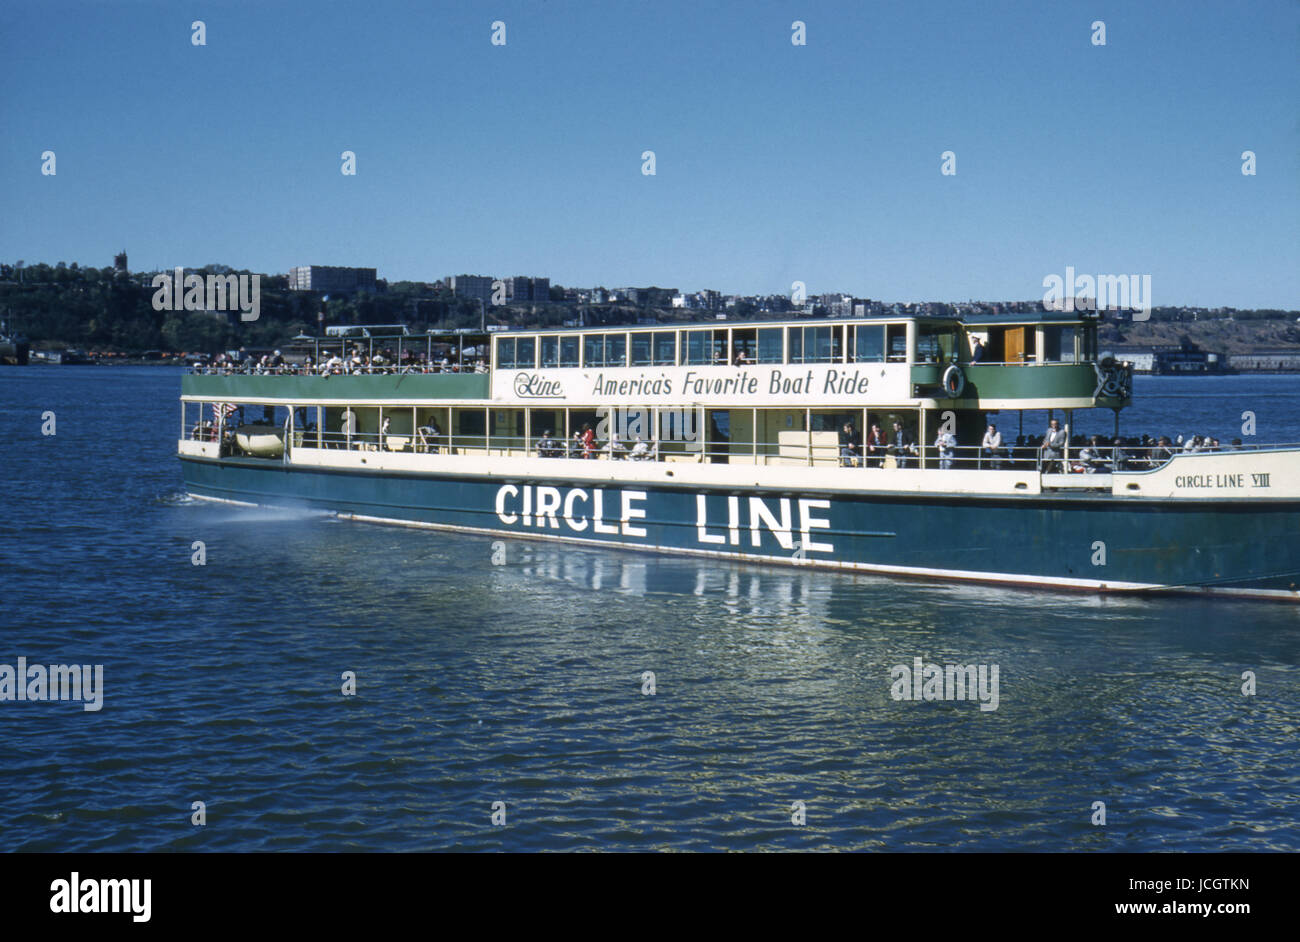 Antique October 1958 photograph, Circle Line VIII tour boat at Pier 83 on the Hudson River in New York City. SOURCE: ORIGINAL 35mm TRANSPARENCY. Stock Photo